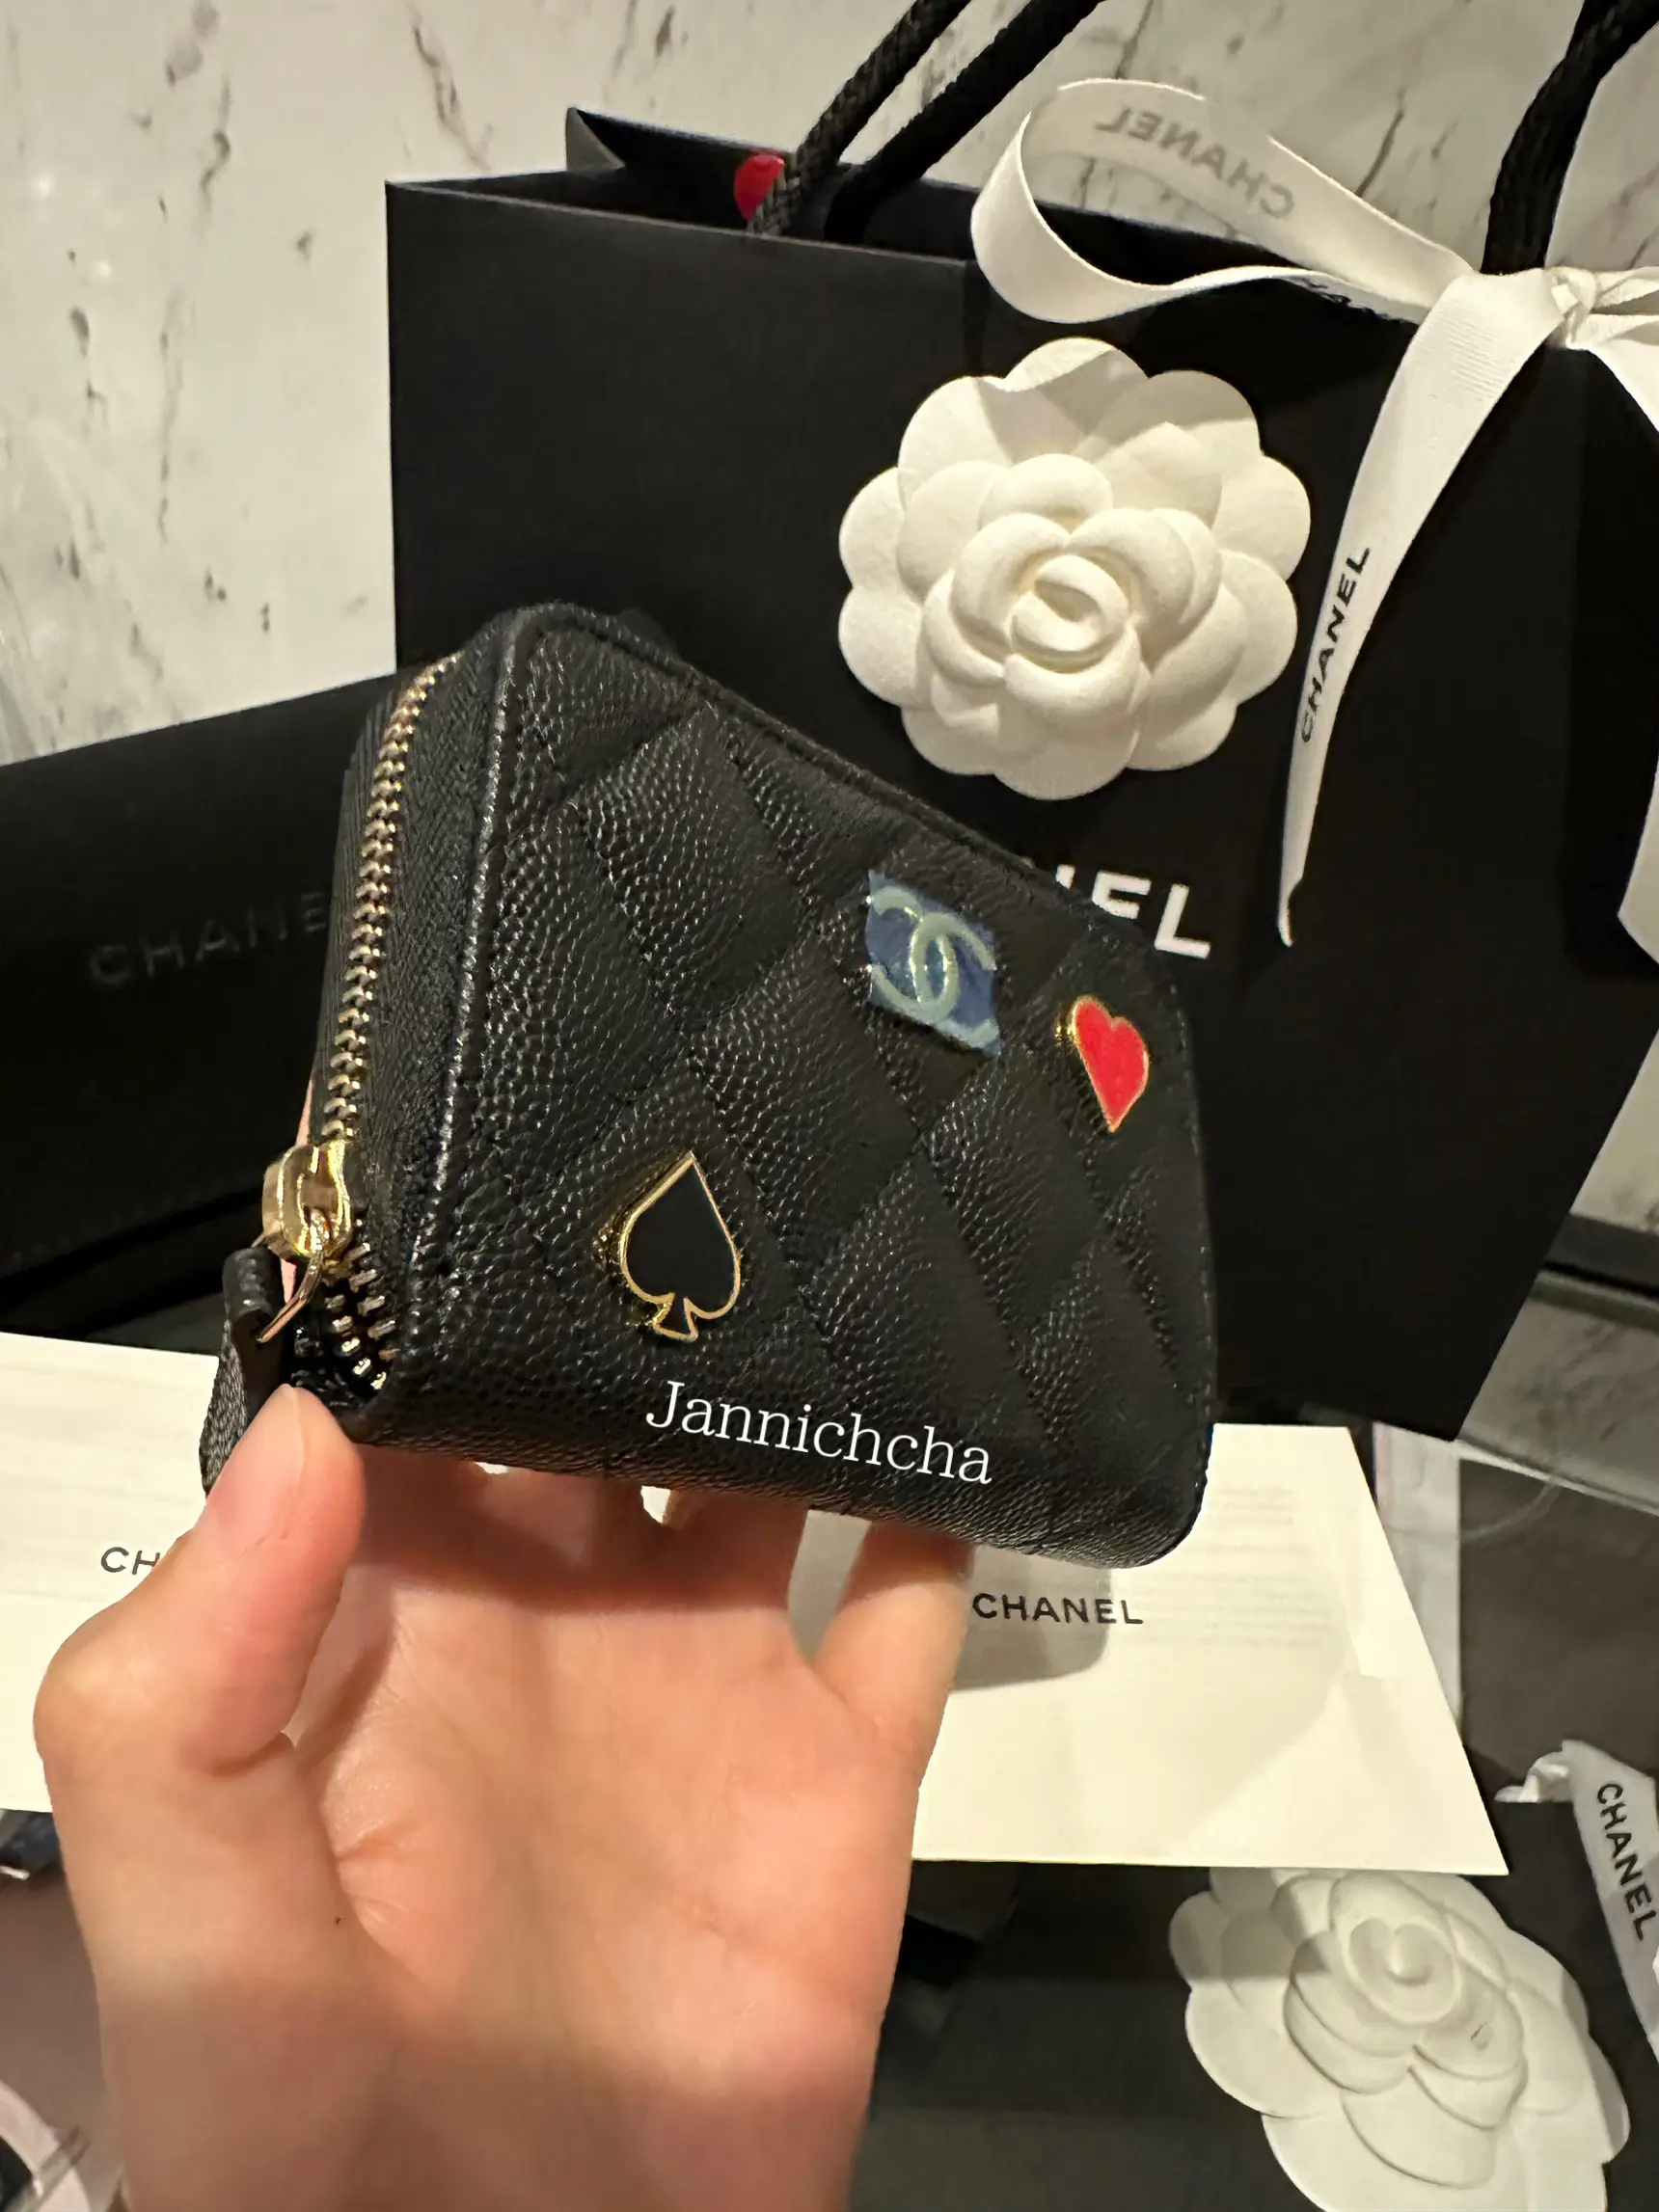 Chanel, Caviar Card Holder with SHW